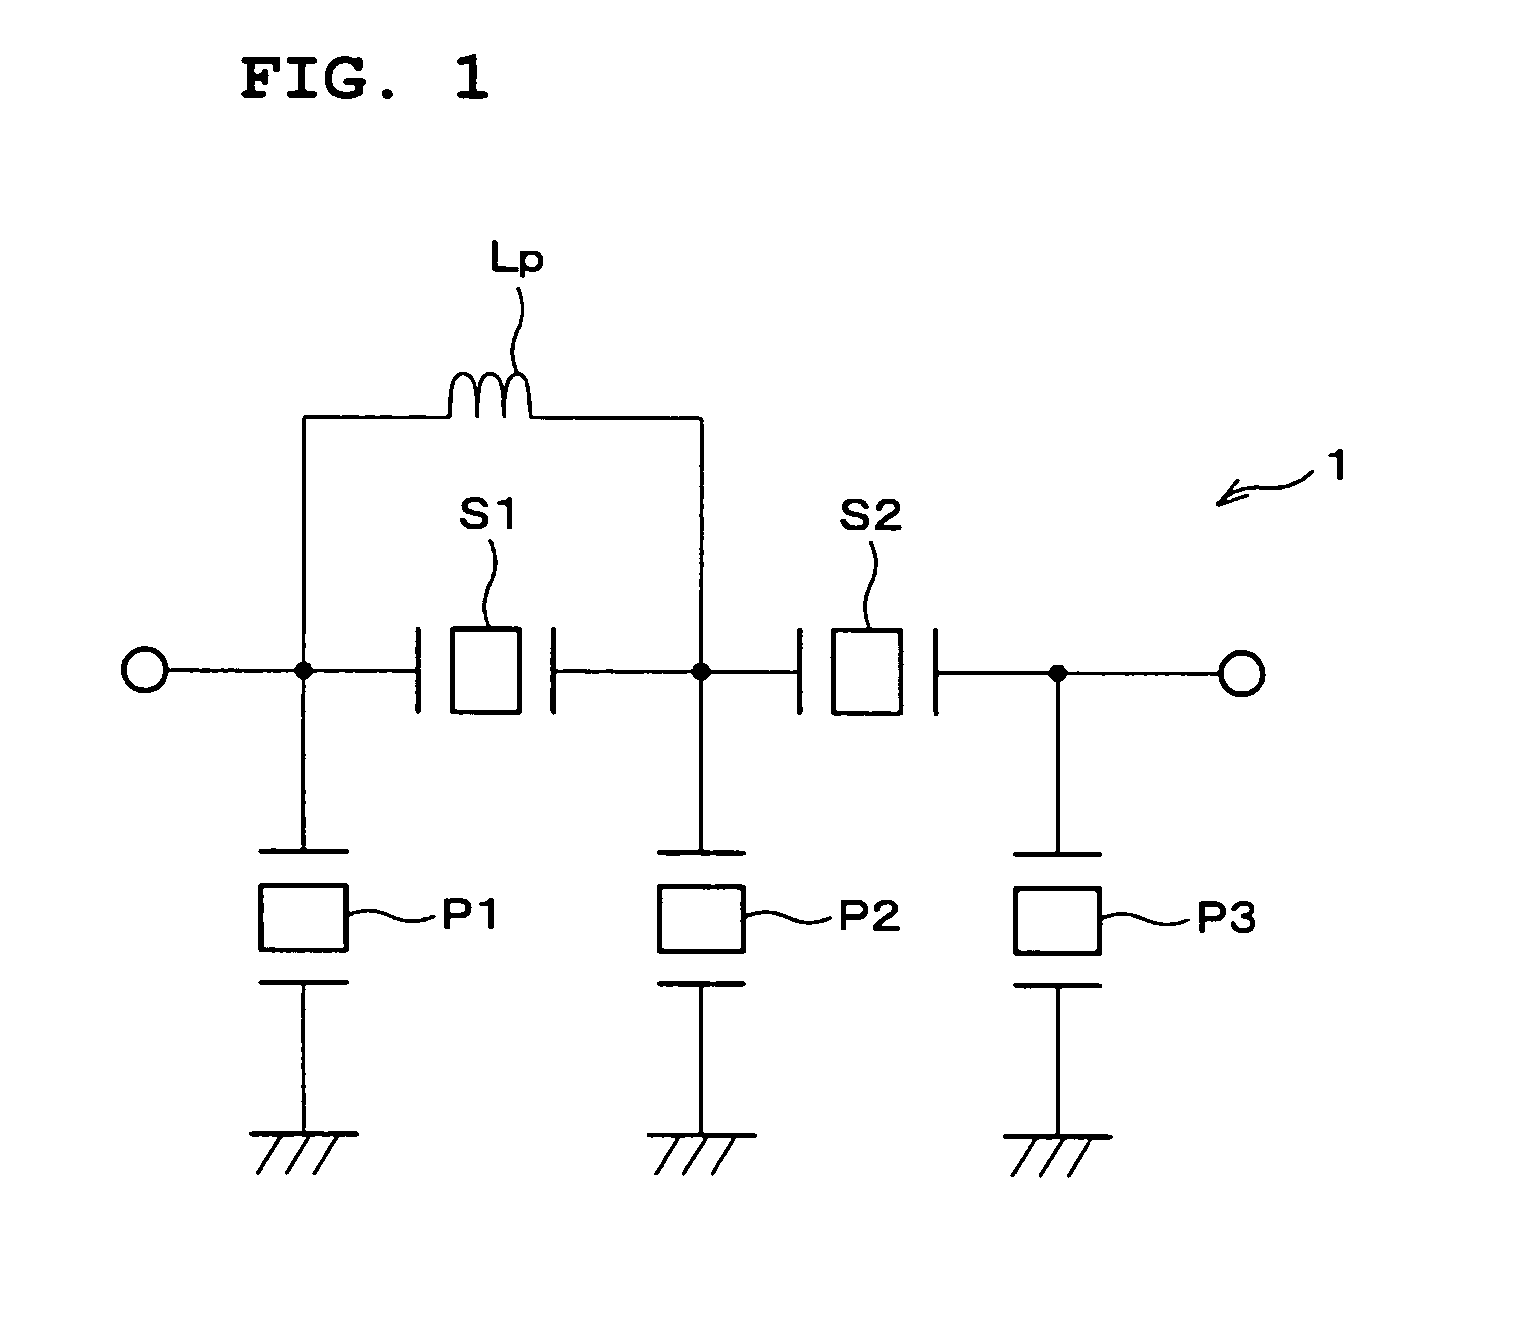 Ladder filter, branching filter, and communication apparatus